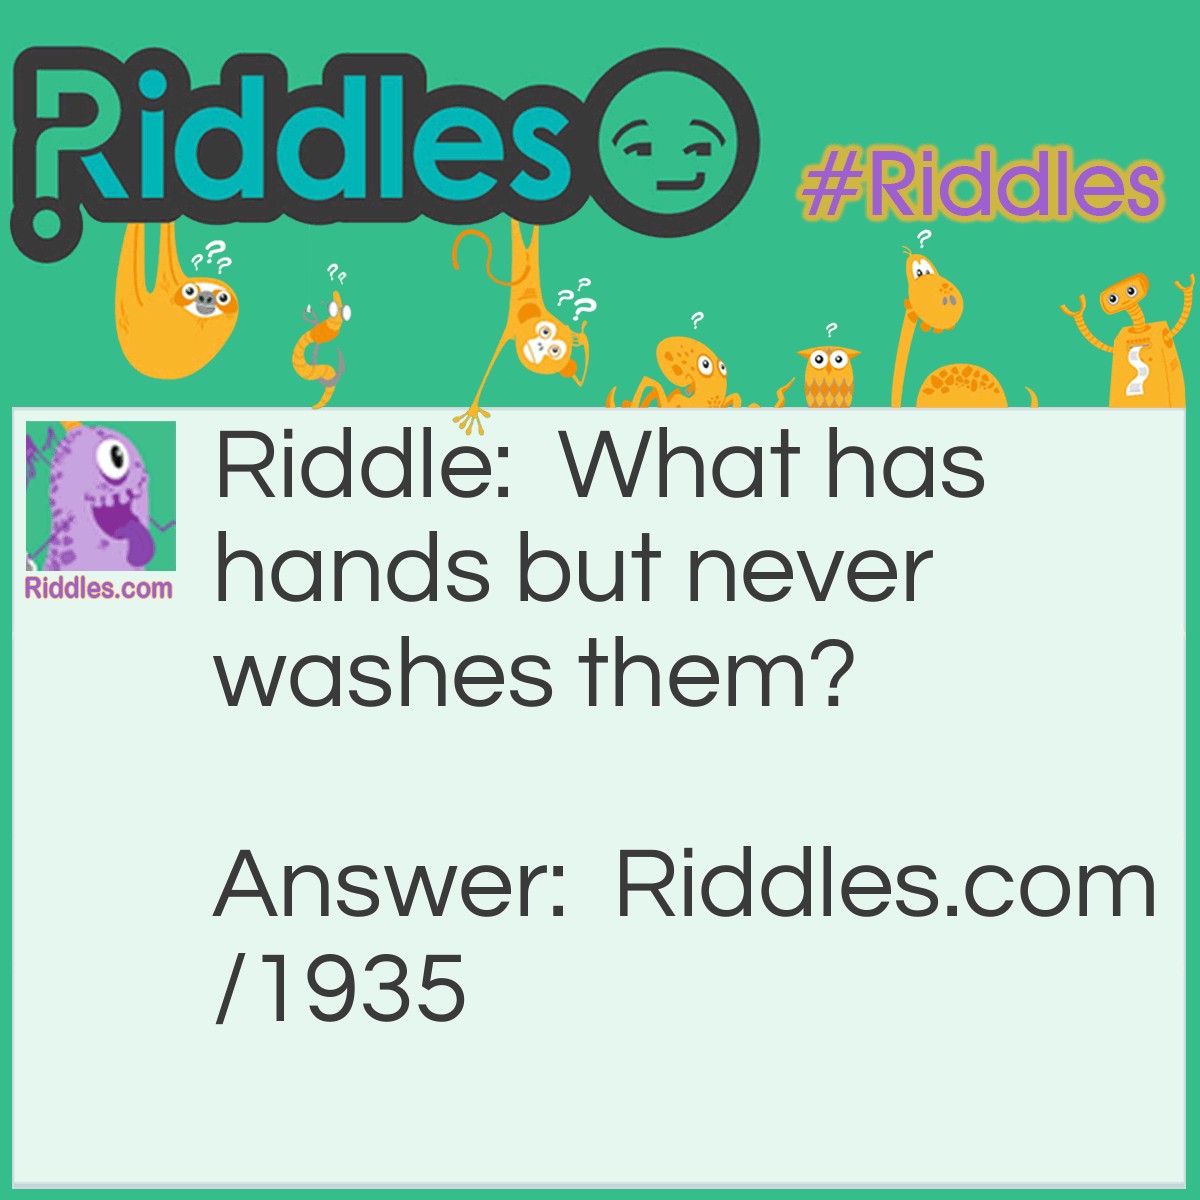 Riddle: What has hands but never washes them? Answer: A clock.